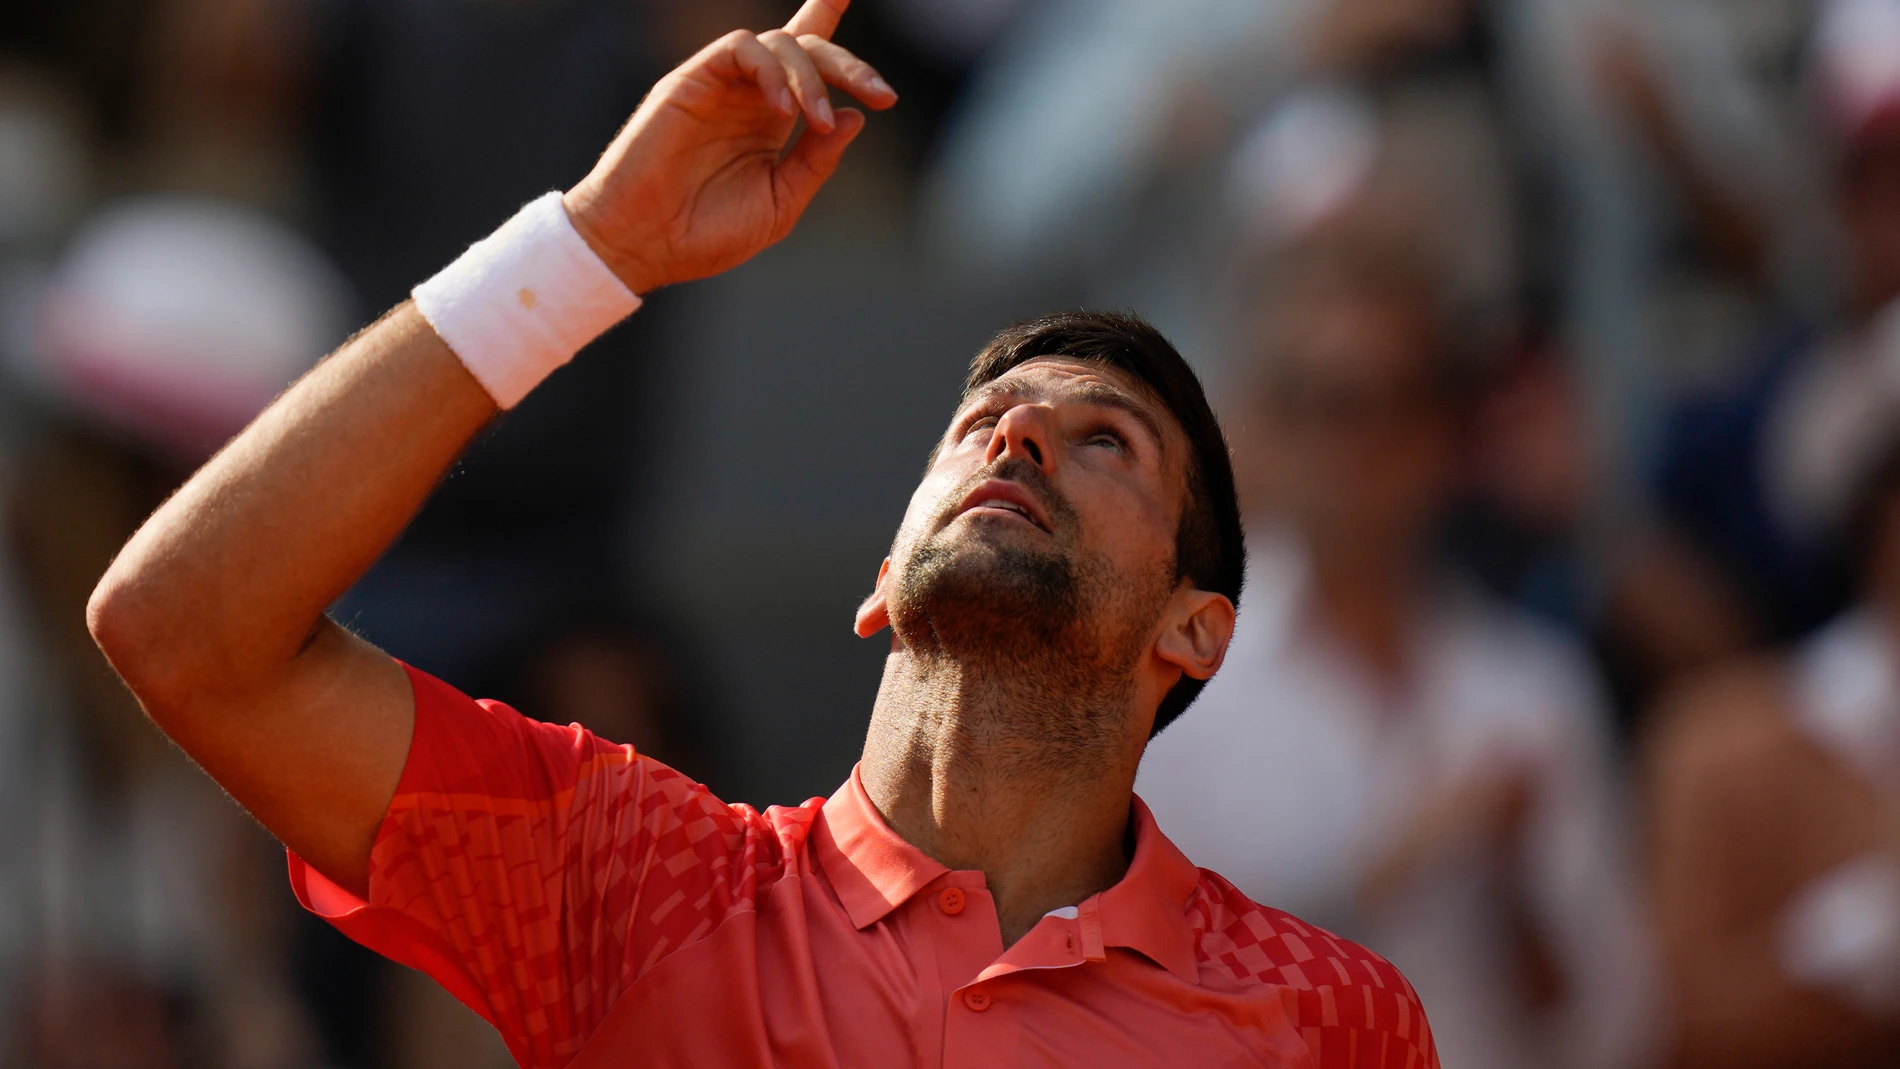 Serbia's Novak Djokovic celebrates winning his semifinal match of the French Open tennis tournament against Spain's Carlos Alcaraz in four sets, 6-3, 5-7, 6-1, 6-1, at the Roland Garros stadium in Paris, Friday, June 9, 2023. (AP Photo/Thibault Camus)